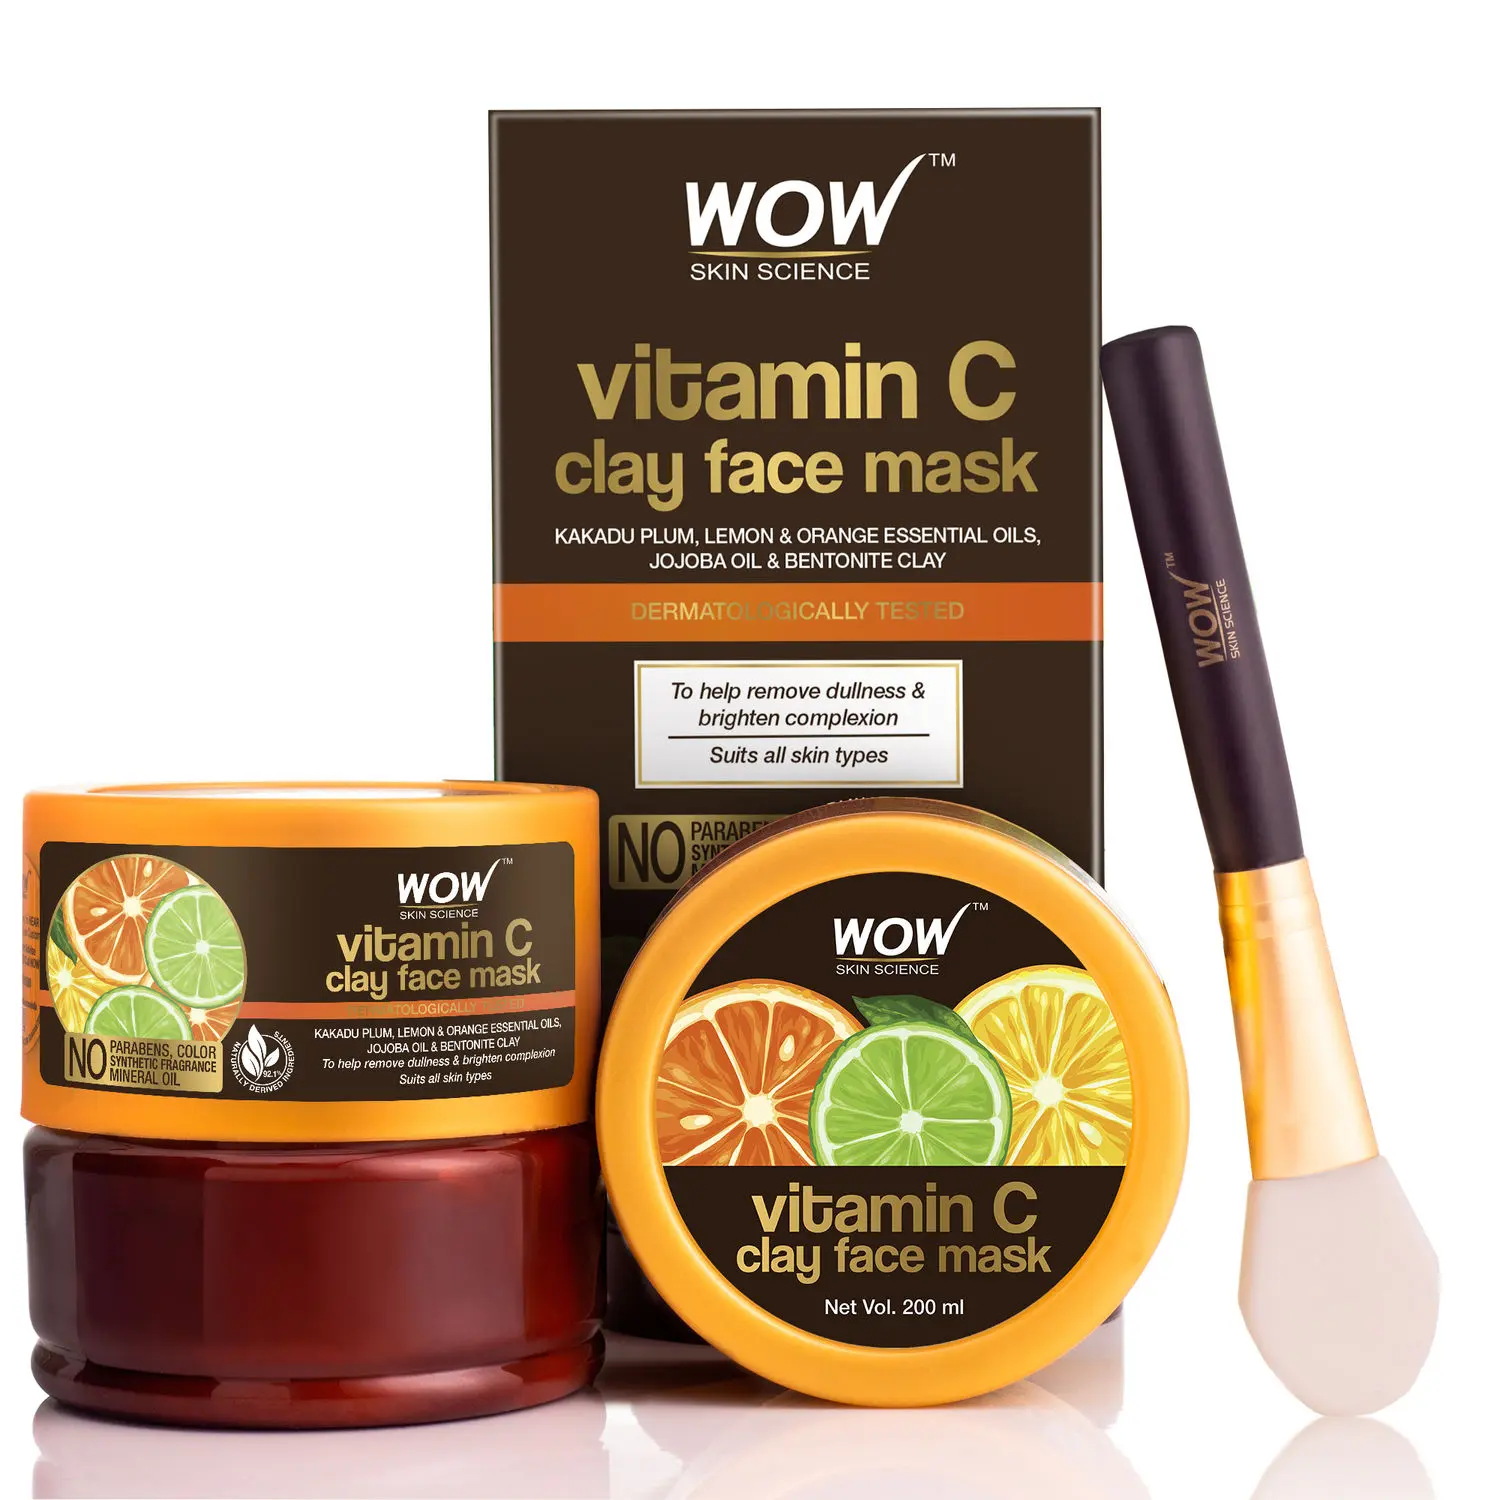 WOW Skin Science Vitamin C Glow Clay Face Mask (200 ml)